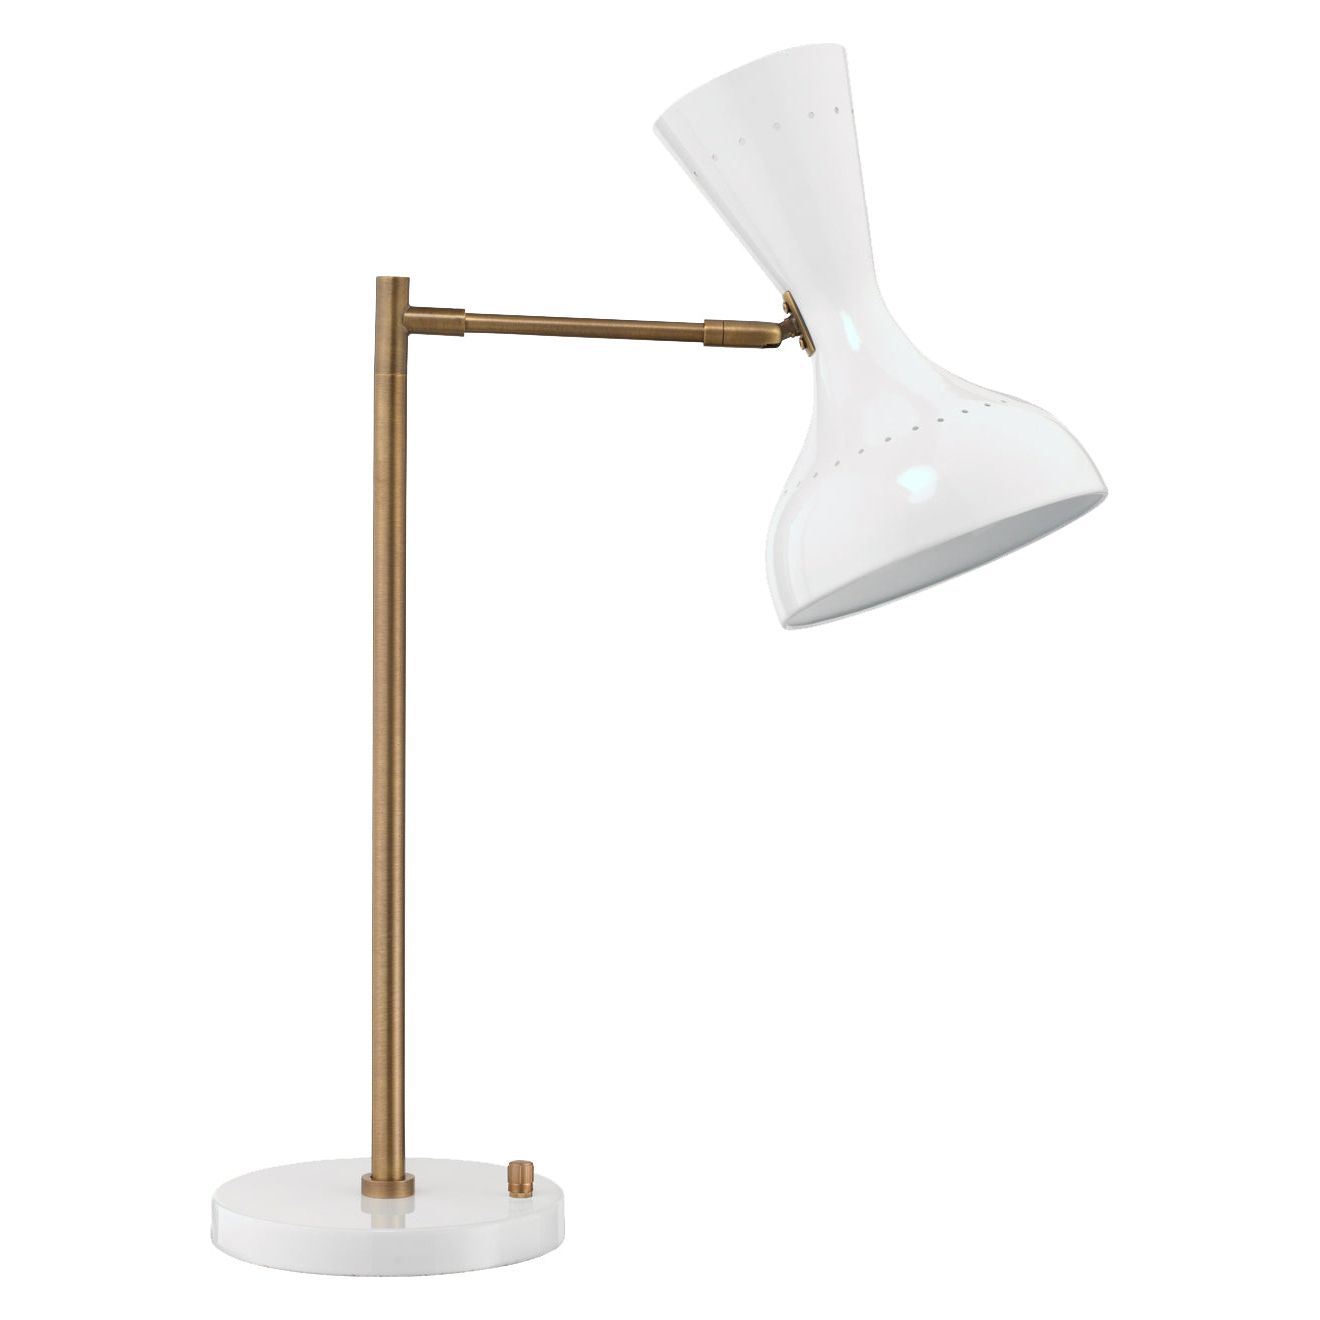 Jamie Young Company - 1PISA-TLWH - Pisa Swing Arm Table Lamp - Pisa - White and Antique Brass